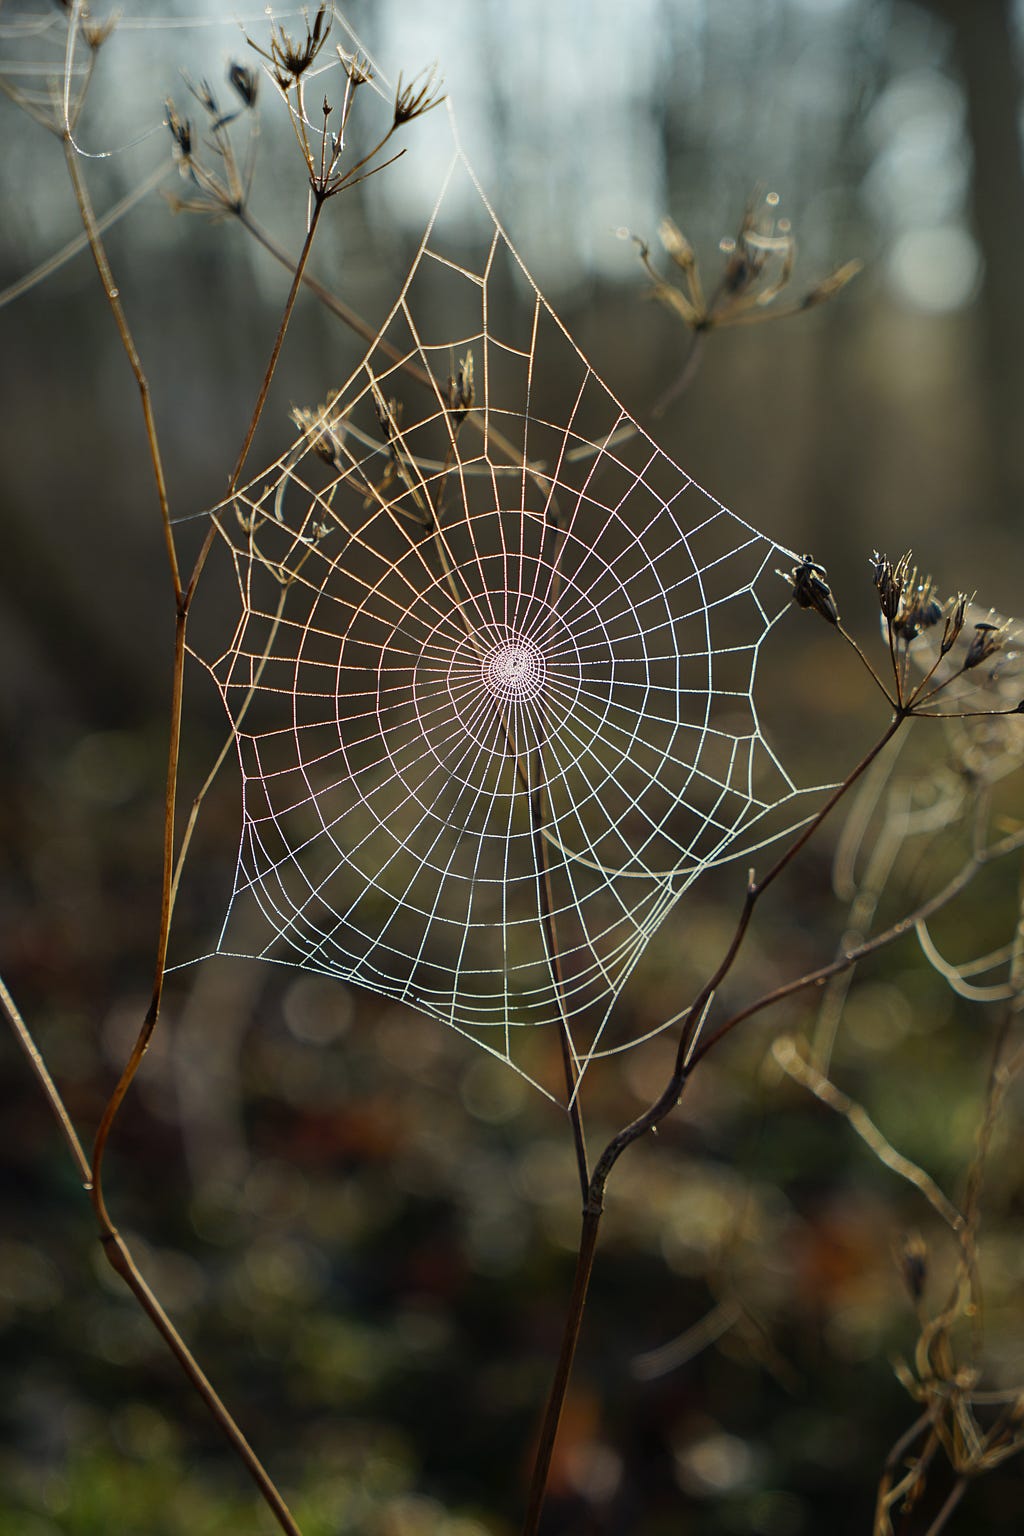 A dew-laden photo of a spiderweb; a metaphor for the connection and reciprocity we want to achieve in the way we create shared space for learning.